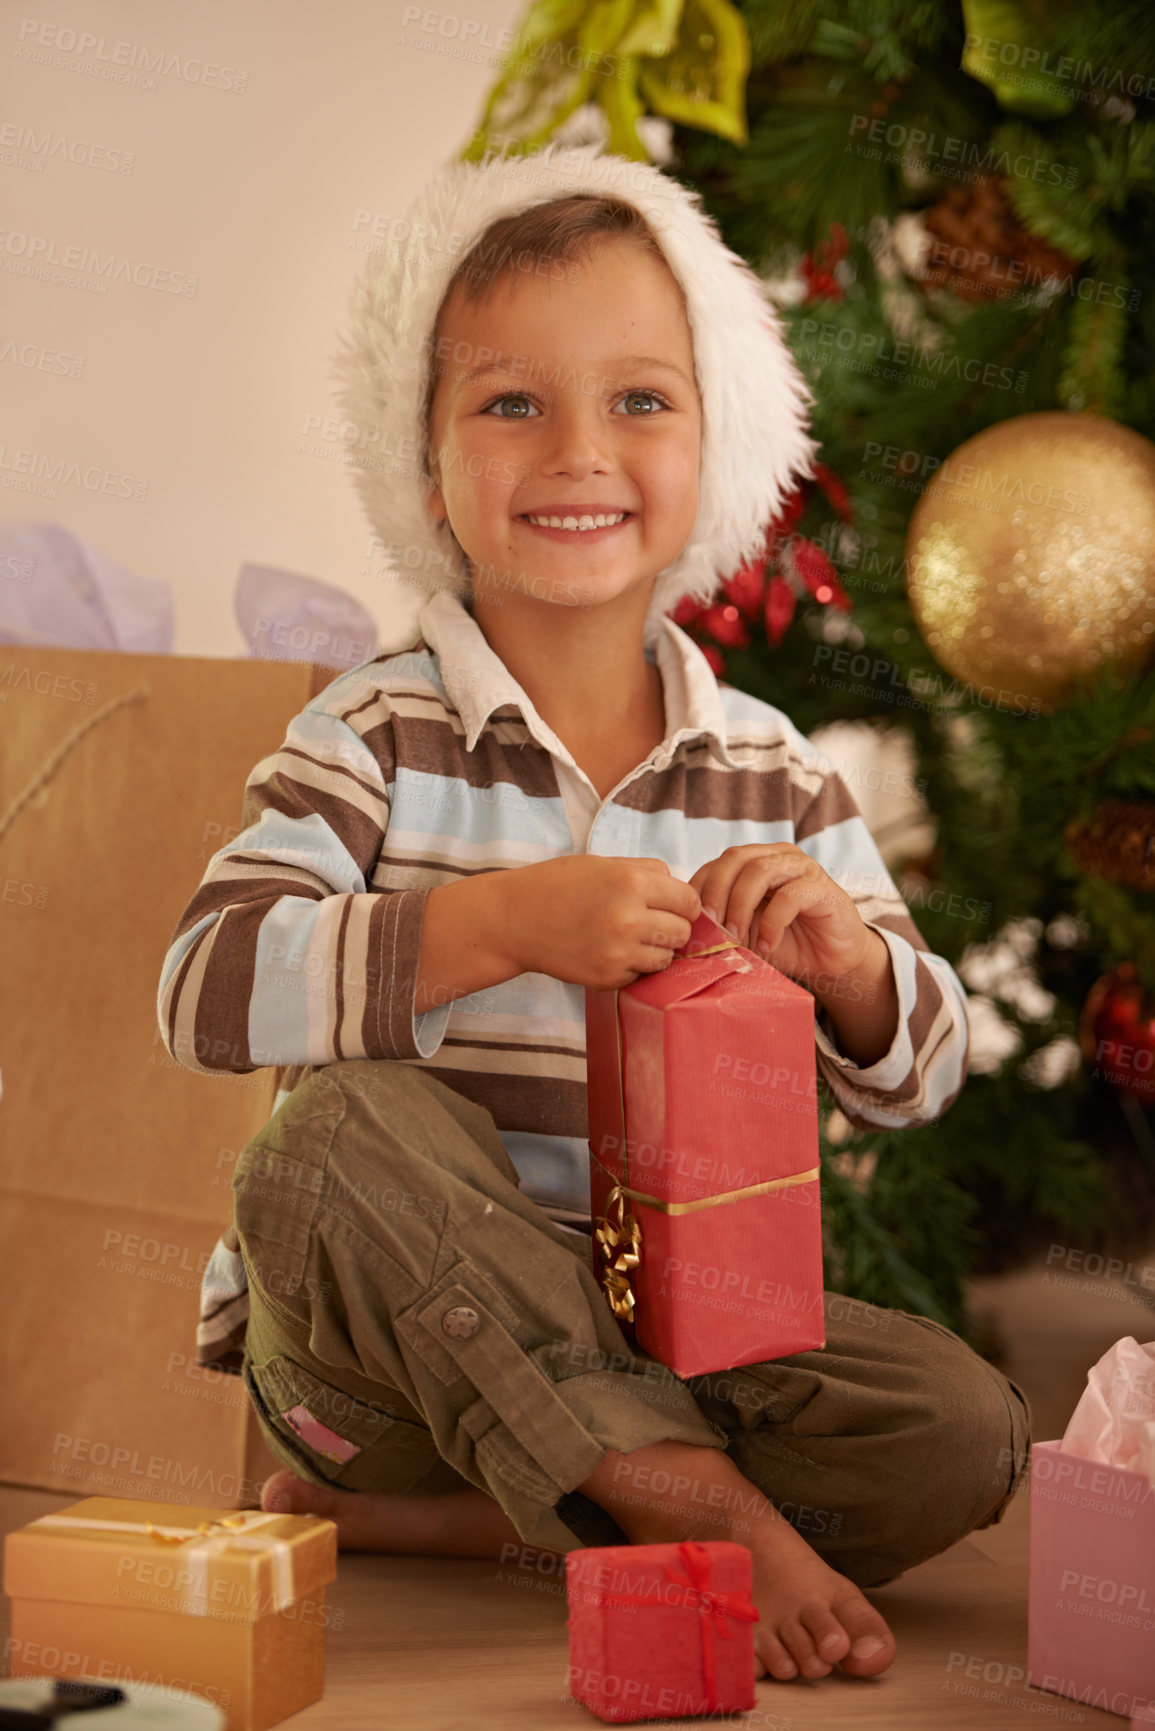 Buy stock photo Shot of a young boy opening a gift on Christmas